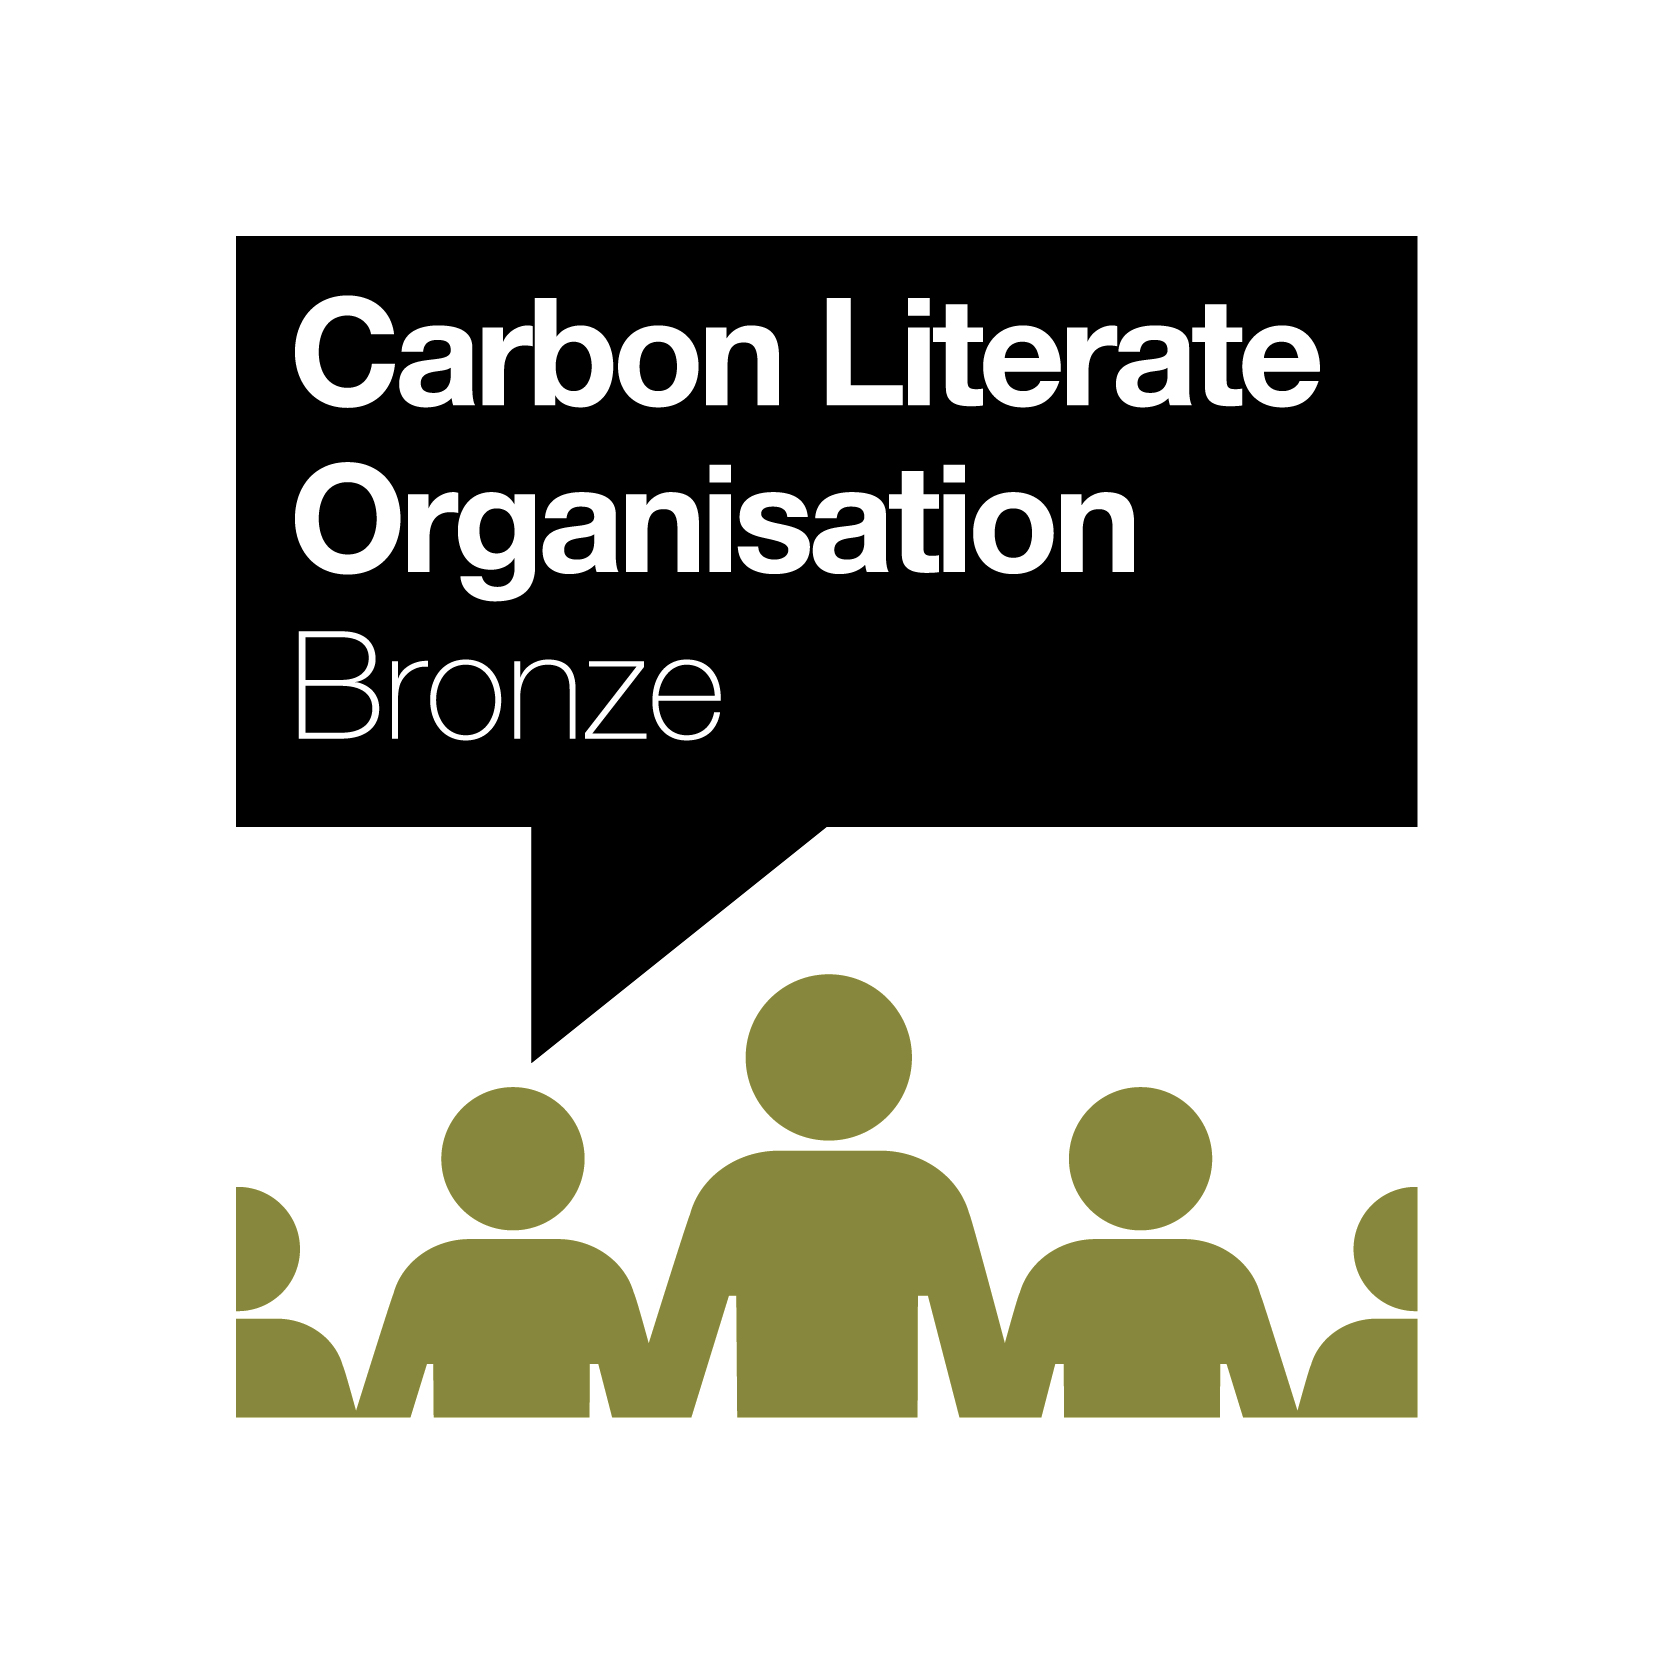 Gold silhouettes with speech bubble saying Carbon Literate Organisation Bronze